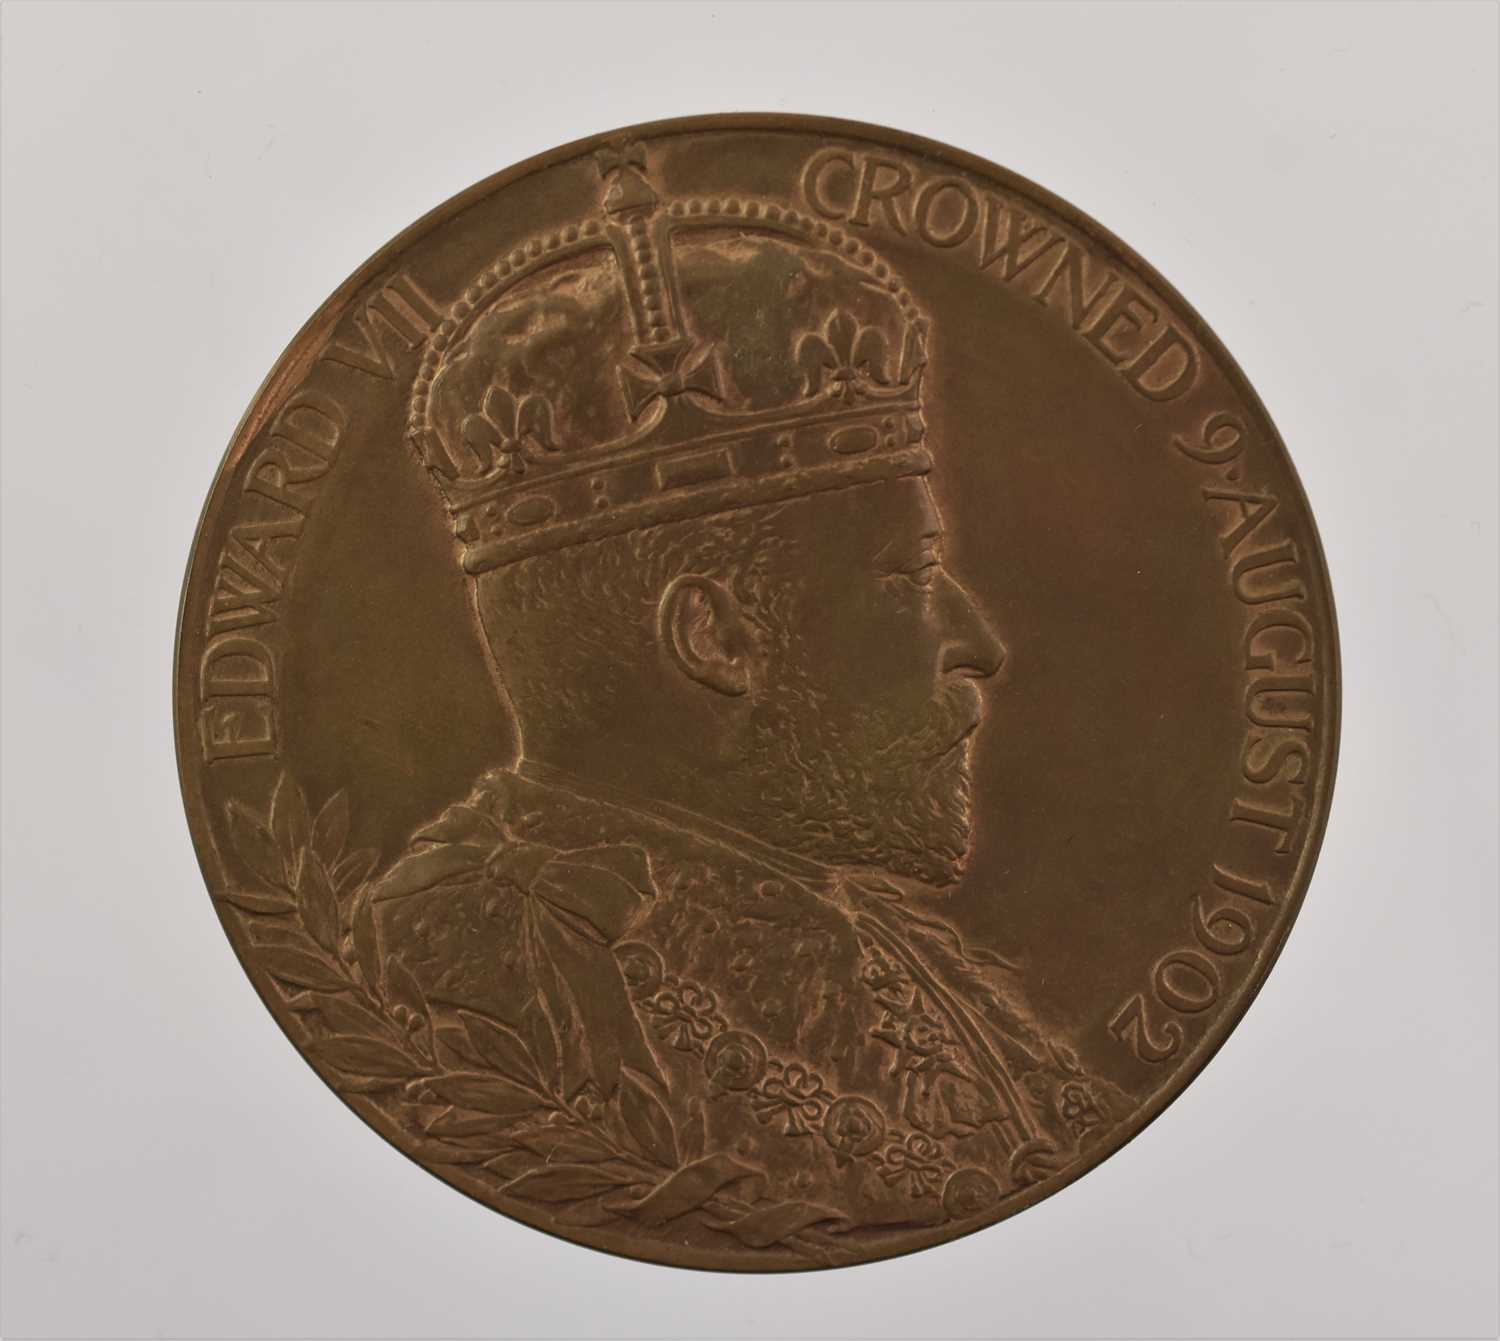 4 x Coronation Medals, comprising: Edward VII AE 1902 (55.5mm, 81.86g), obv. EDWARD VII CORWNED 9 - Image 3 of 6